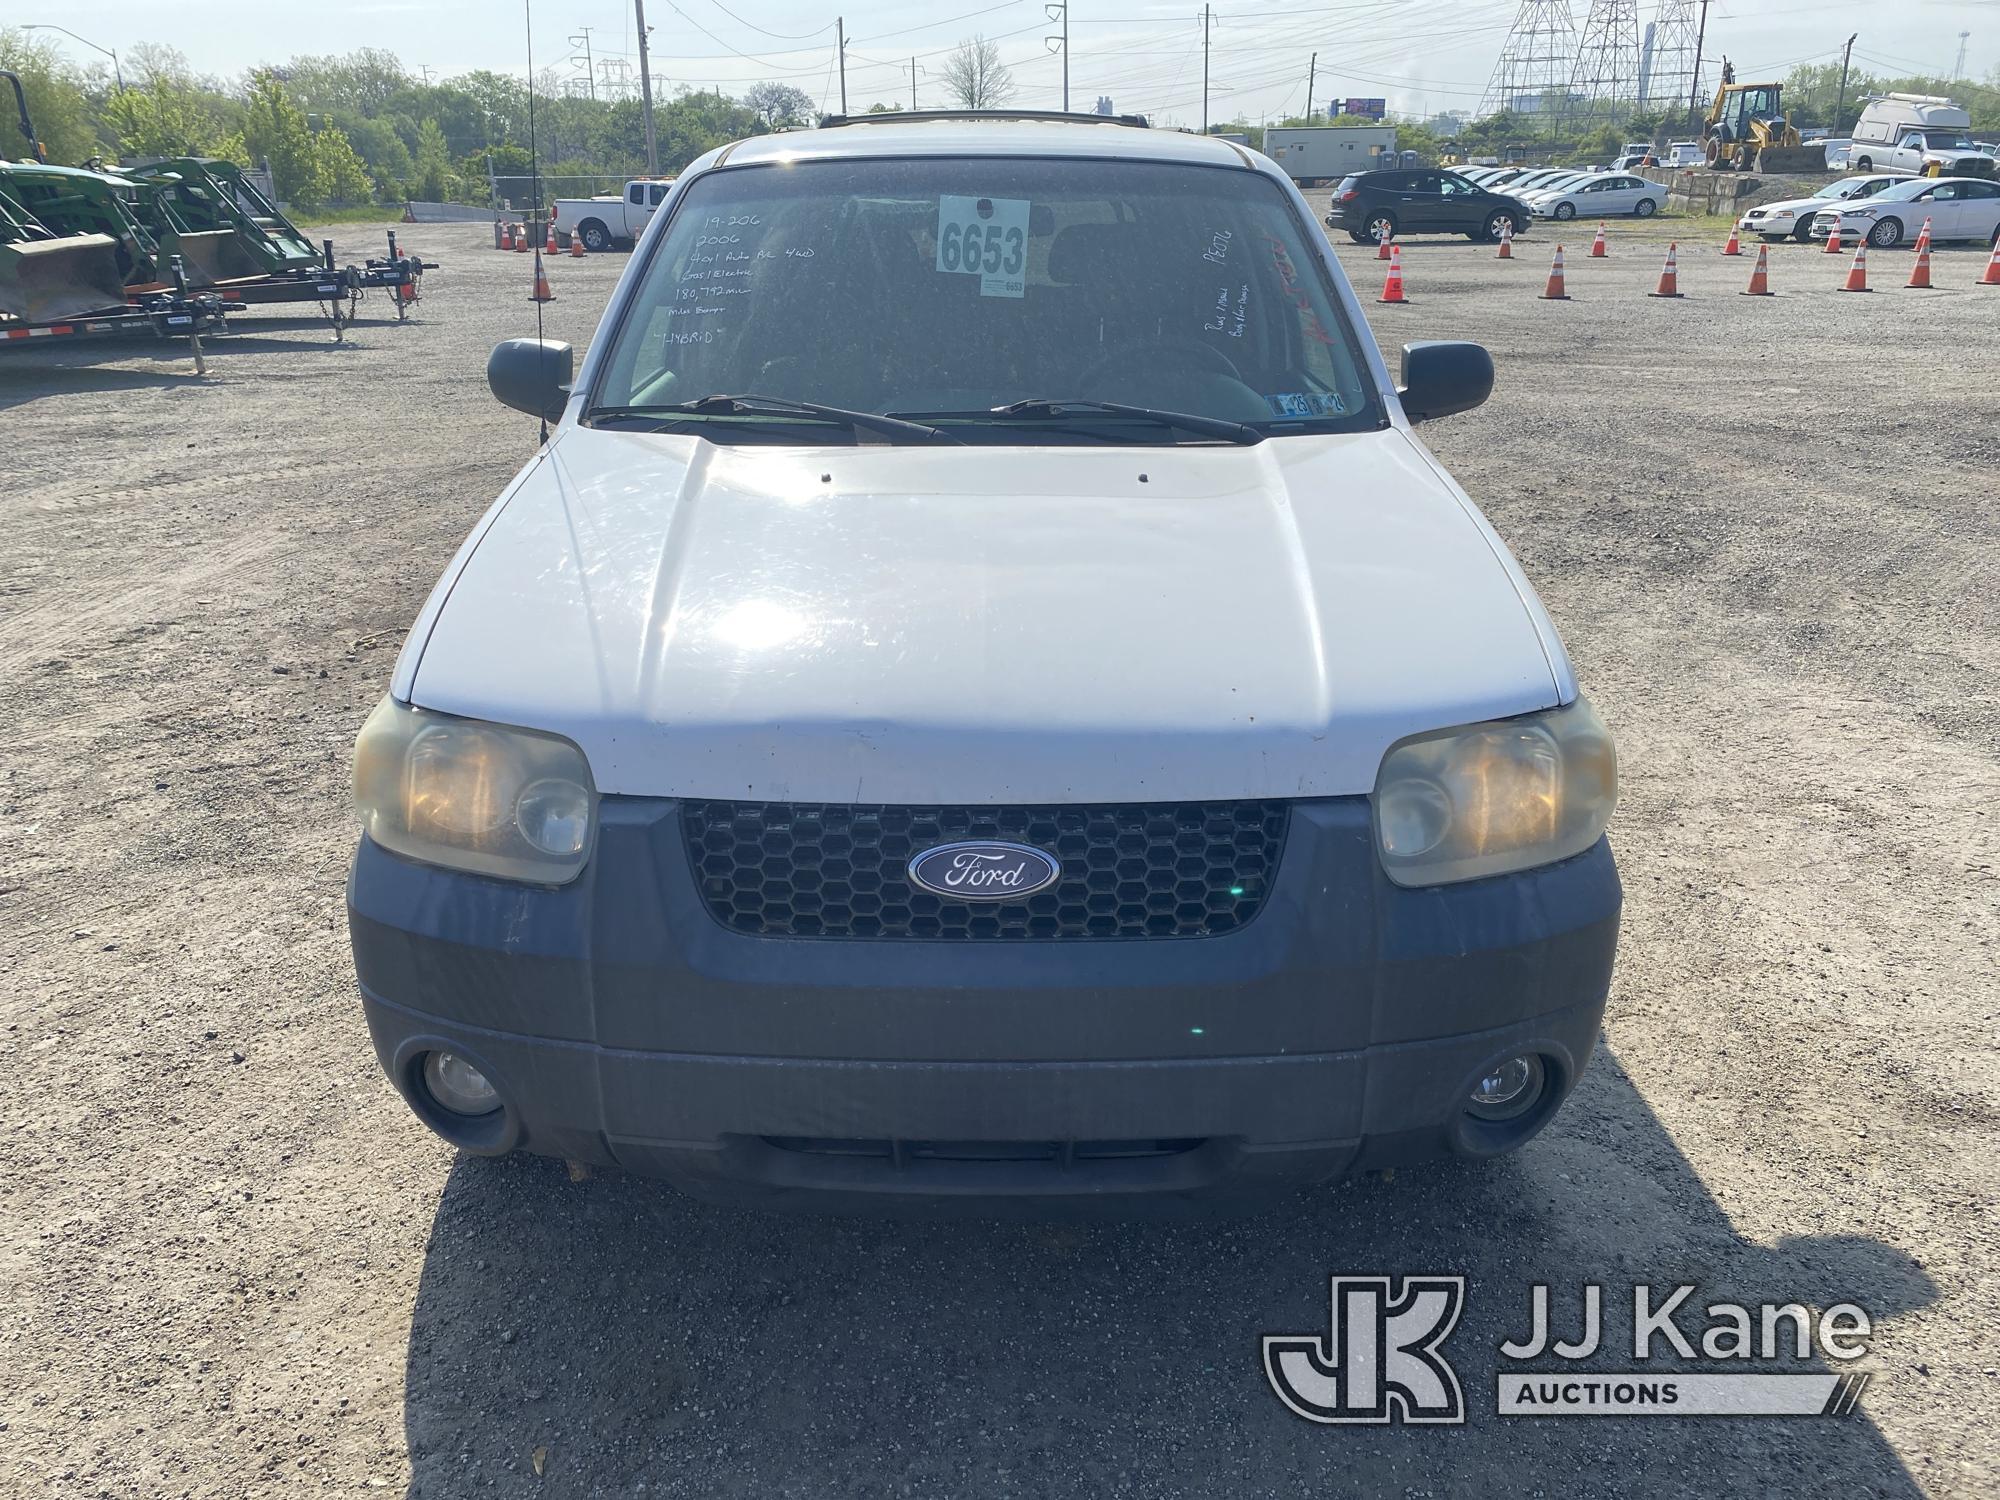 (Plymouth Meeting, PA) 2006 Ford Escape Hybrid 4x4 4-Door Sport Utility Vehicle Runs & Moves, Body &